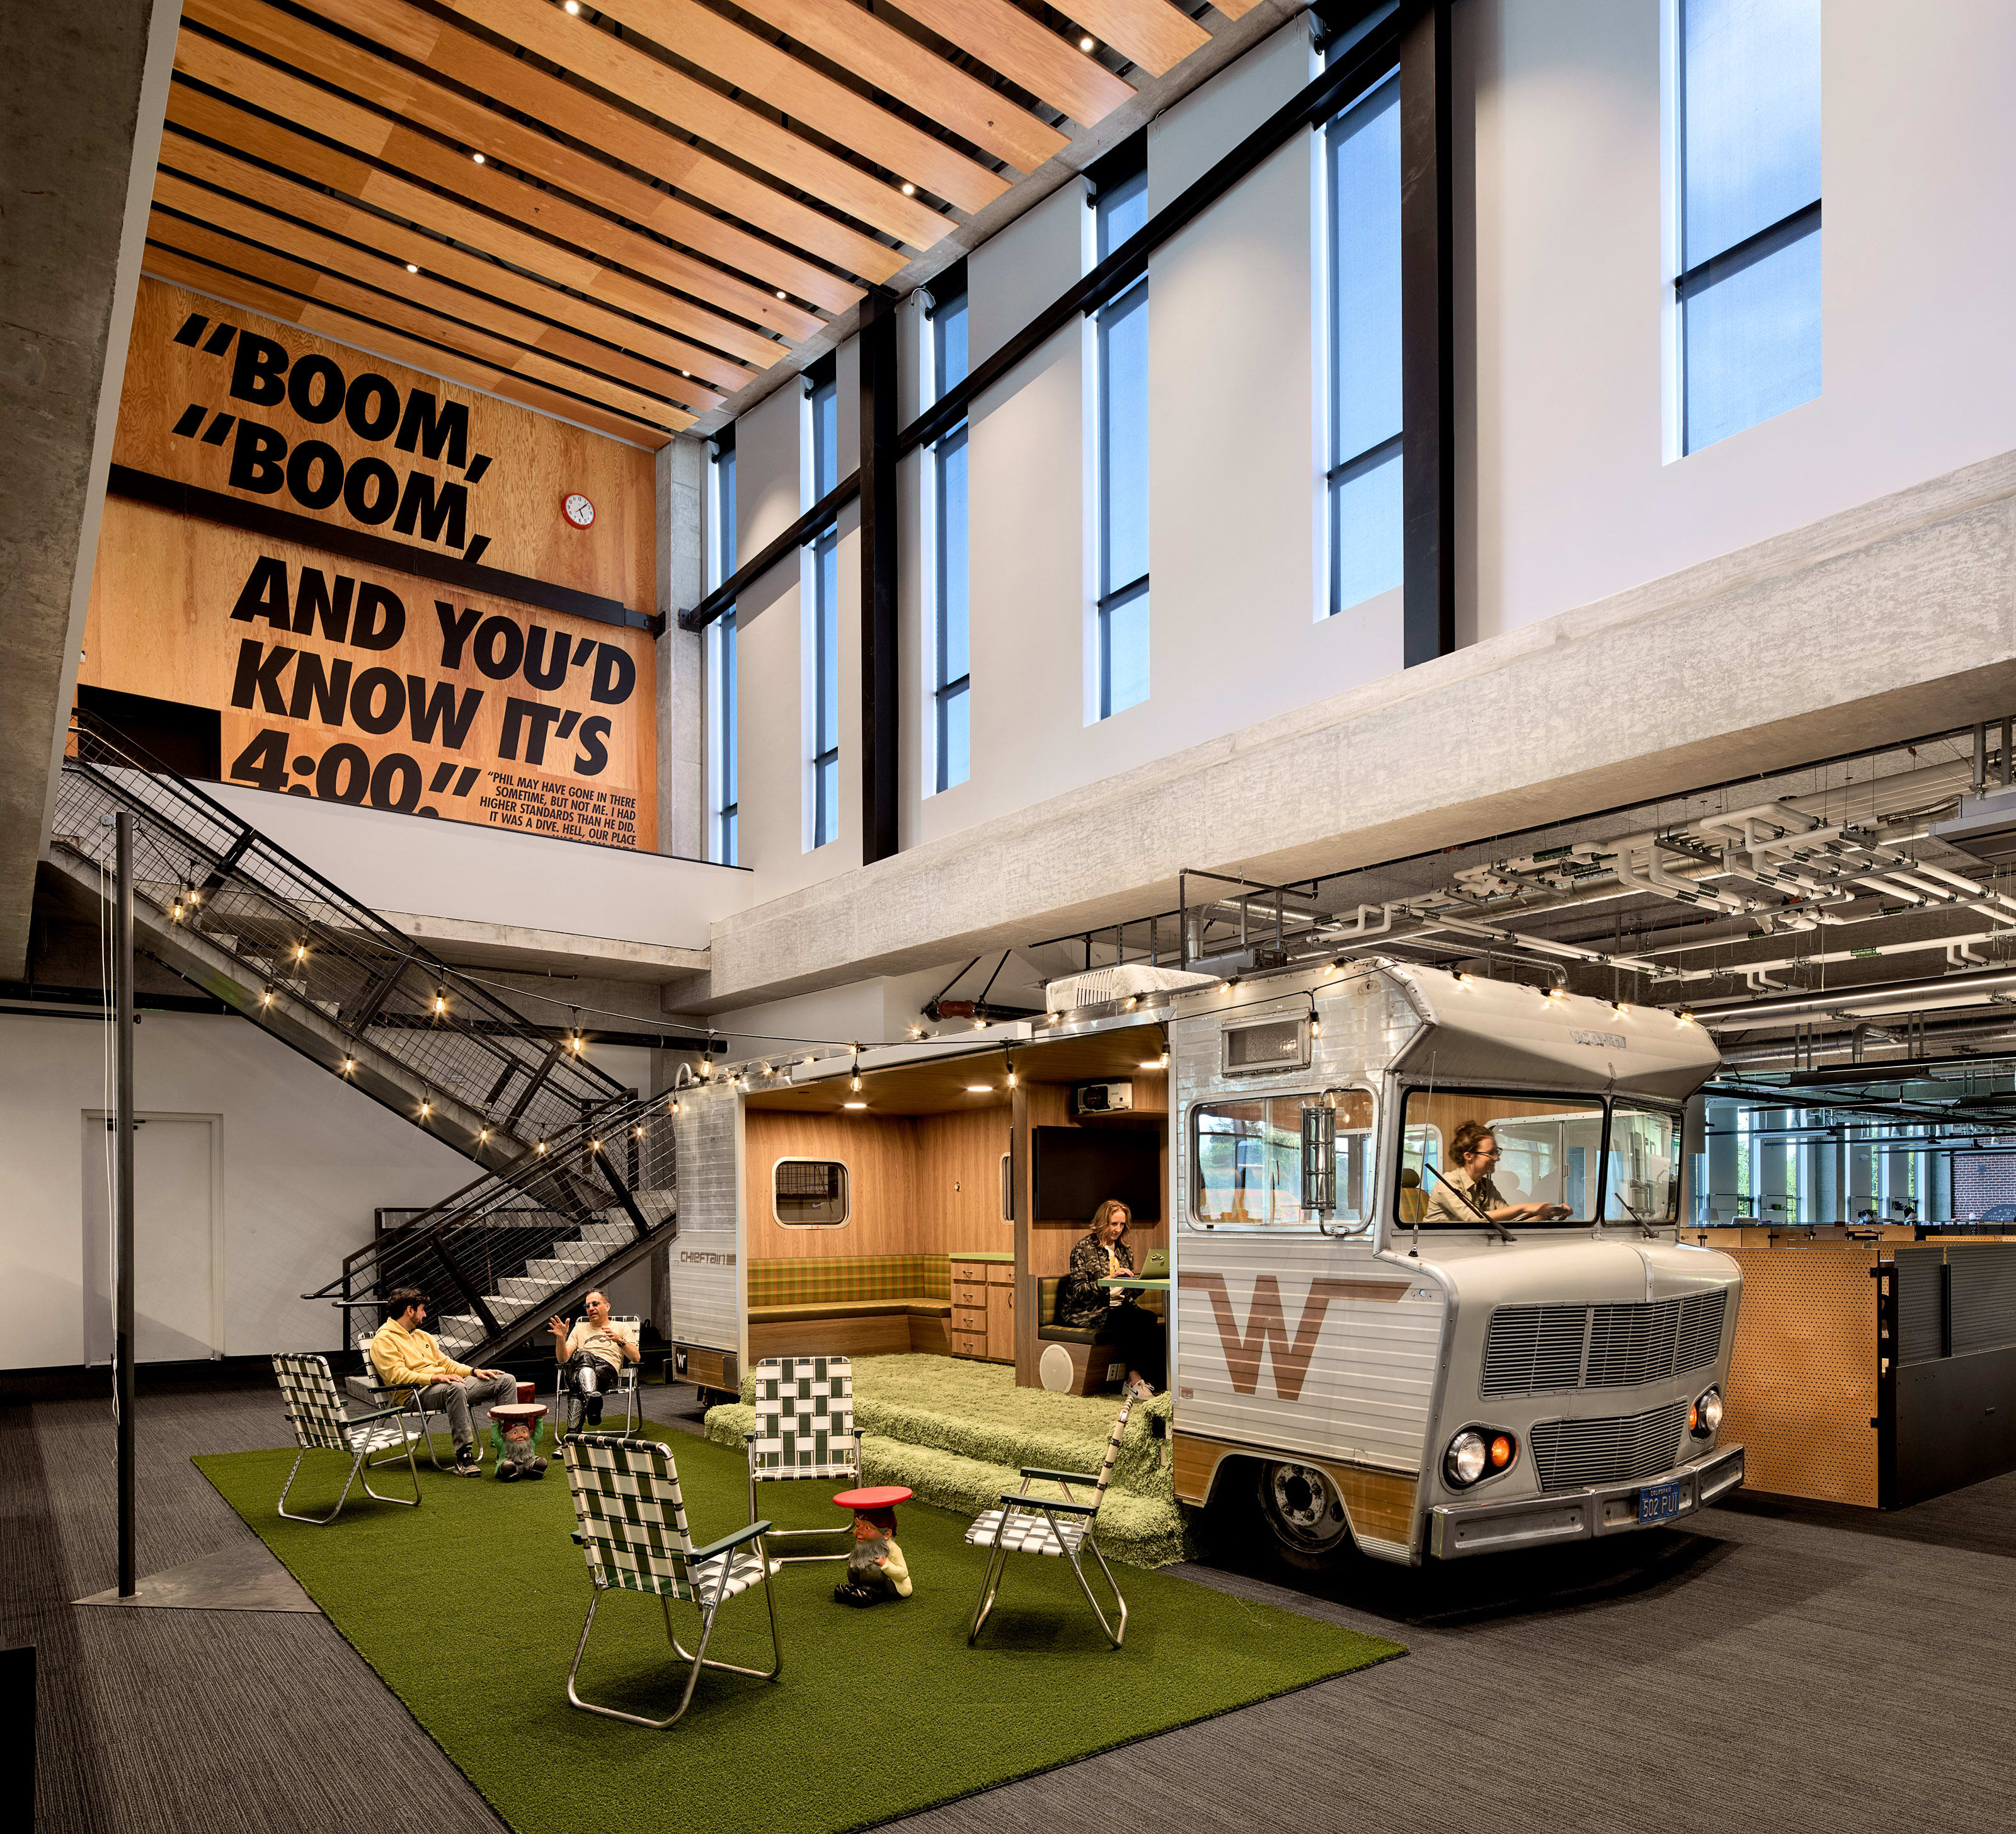 A van inside the LeBron James Innovation Center references the early days of Nike, when Phil Knight sold shoes out of a van